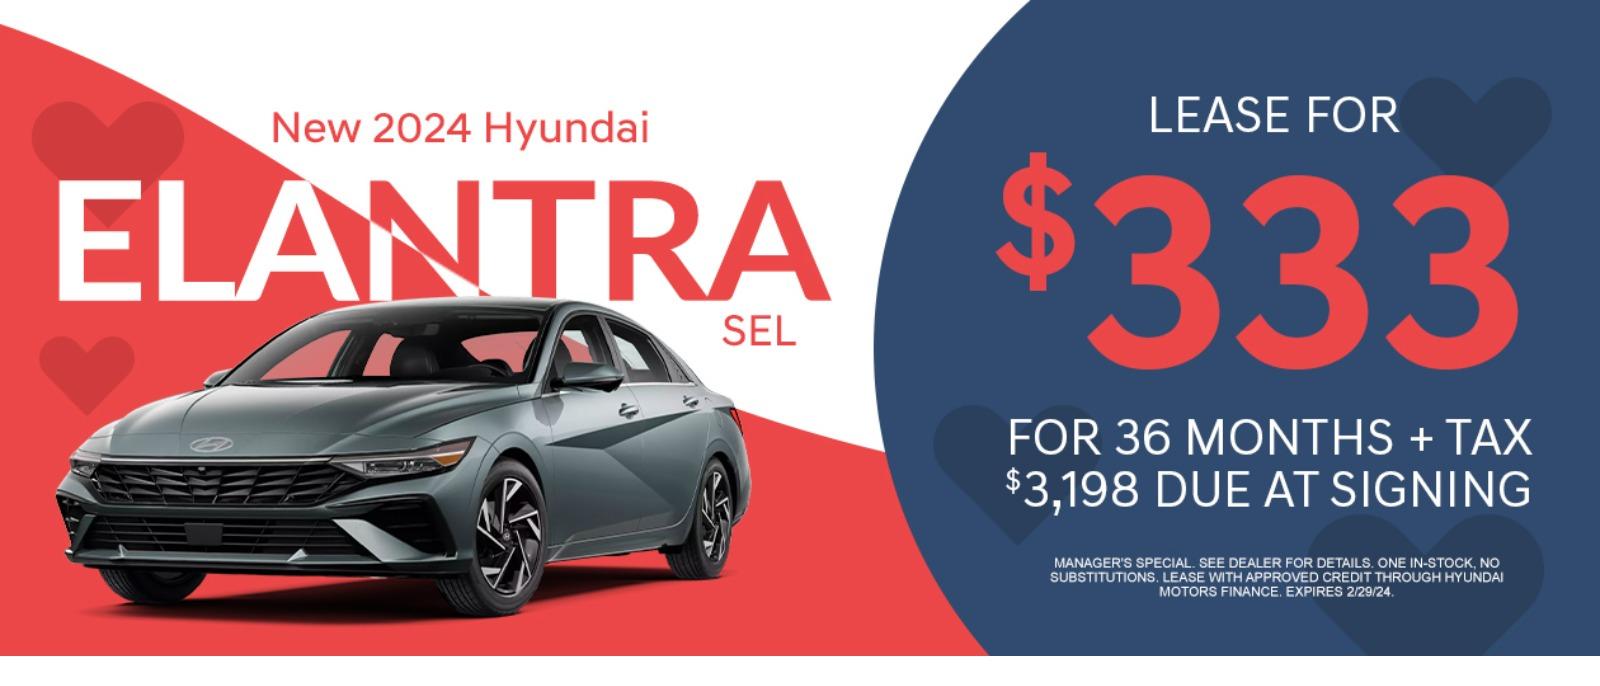 to let dealers sell cars on its site, starting with Hyundai